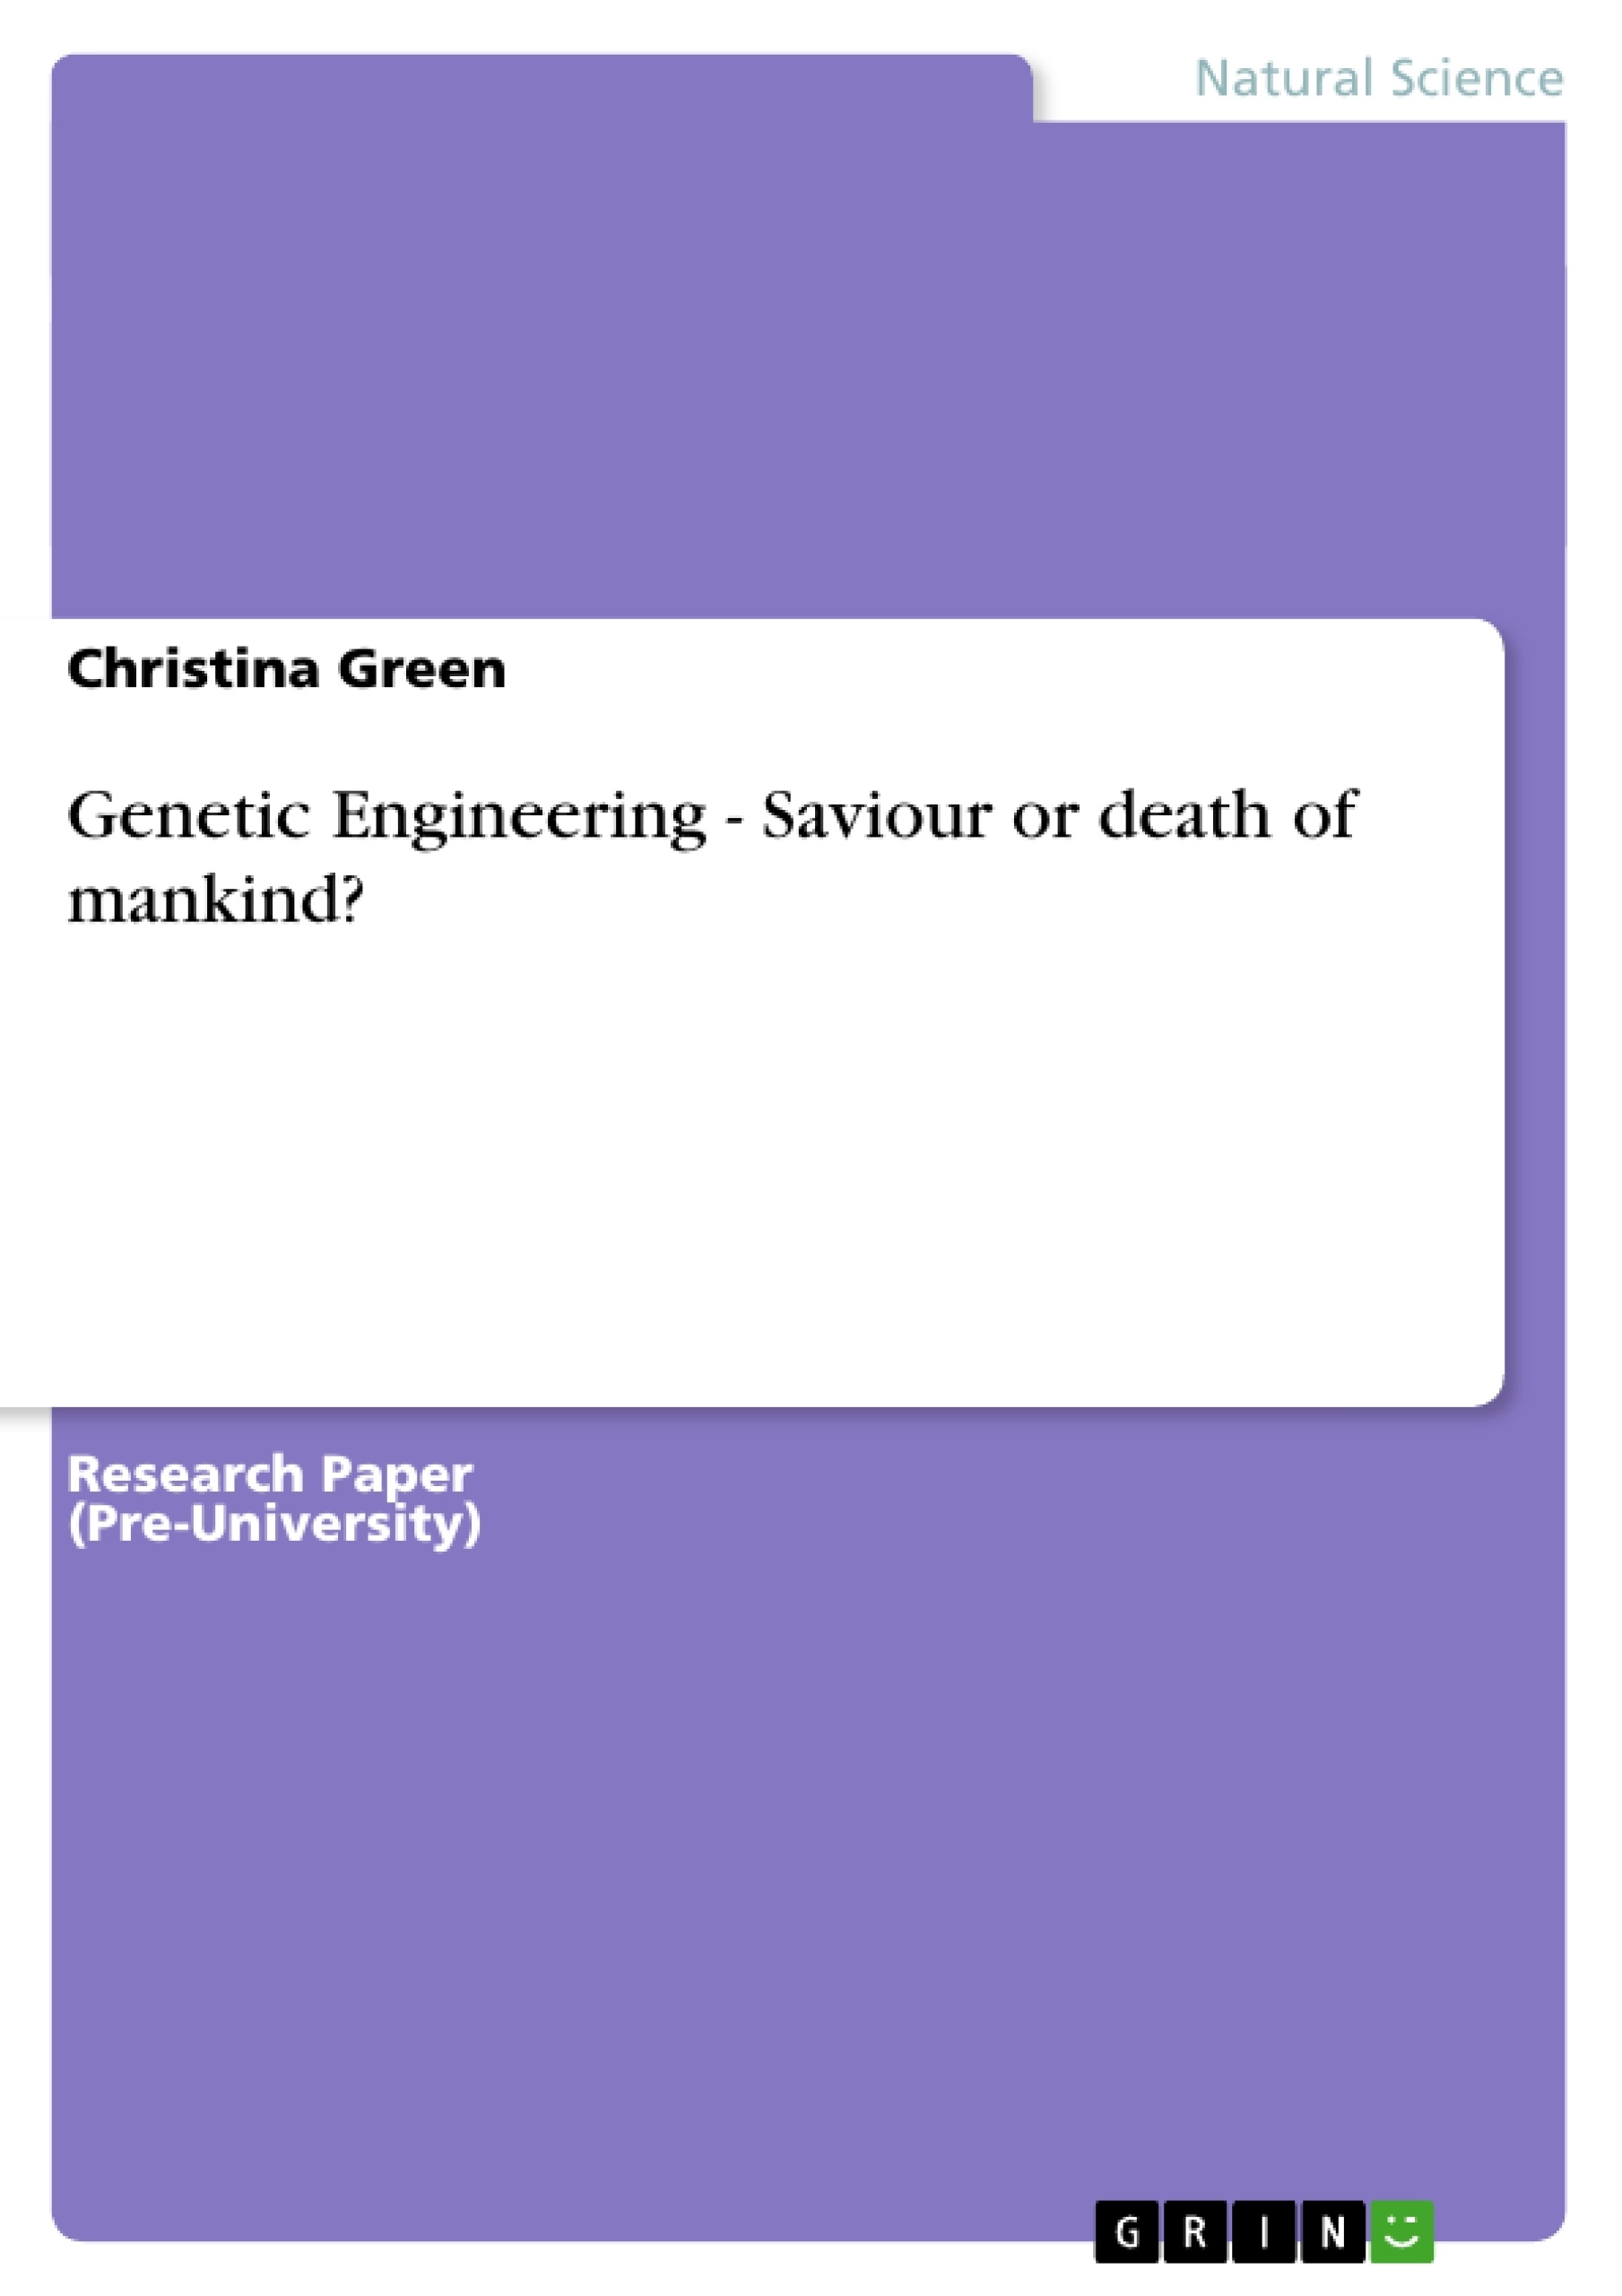 Titre: Genetic Engineering - Saviour or death of mankind?